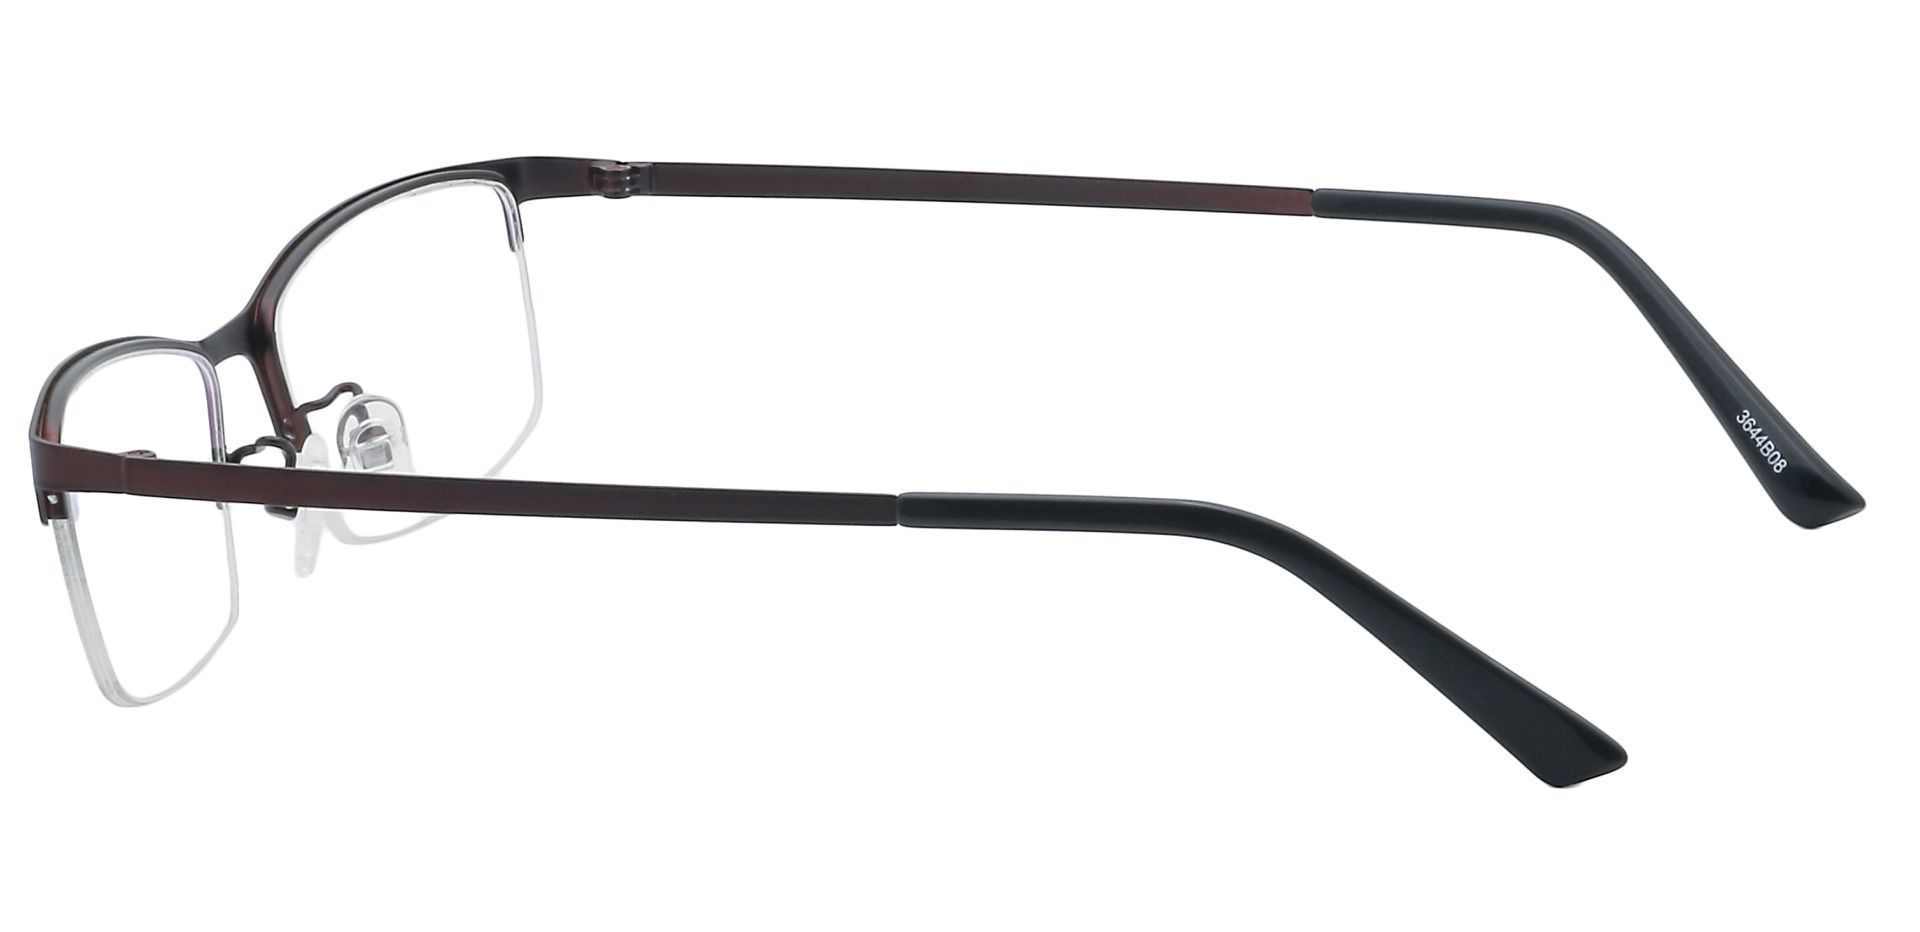 Parsley Rectangle Non-Rx Glasses - Brown